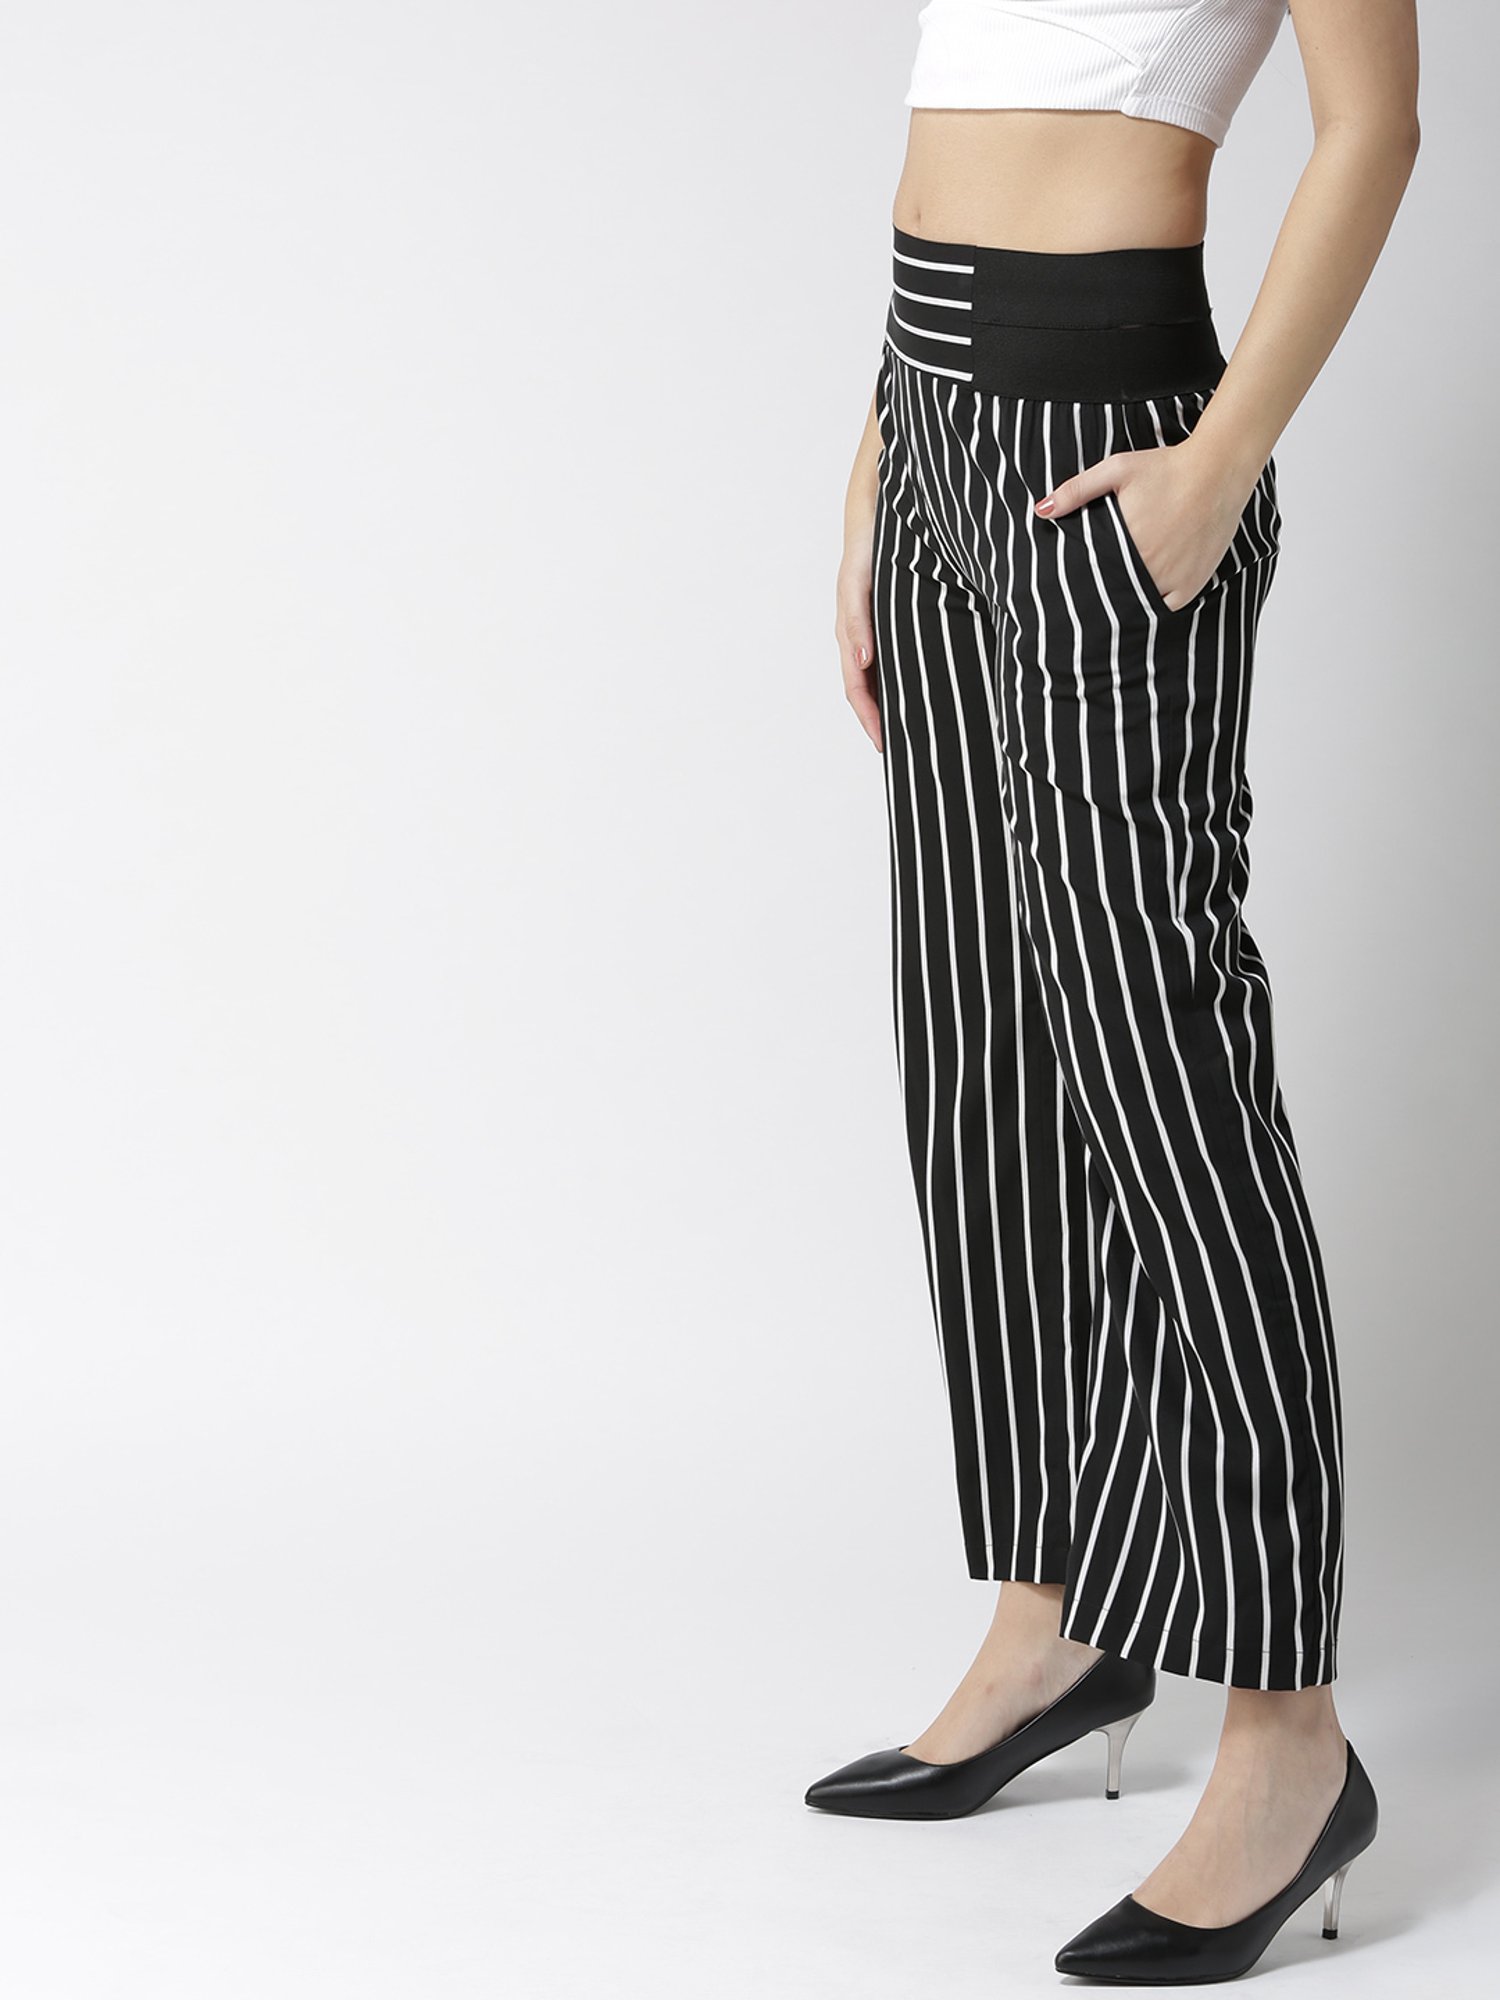 black and white striped pants outfit ideas - YouTube